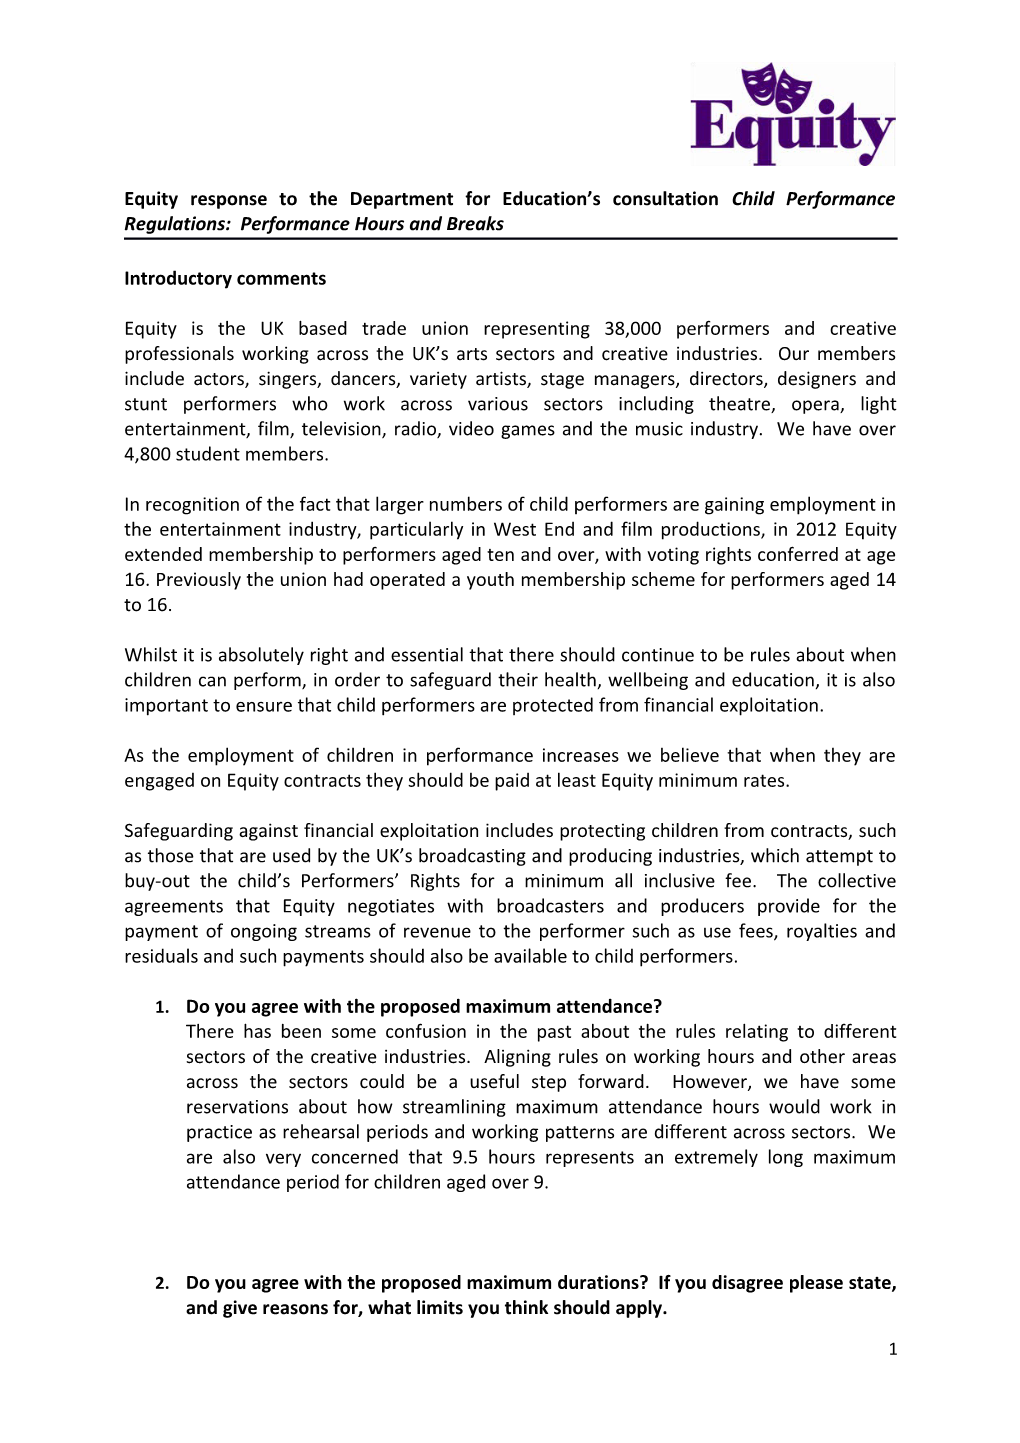 Equity Response to the Department for Education S Consultation Child Performance Regulations